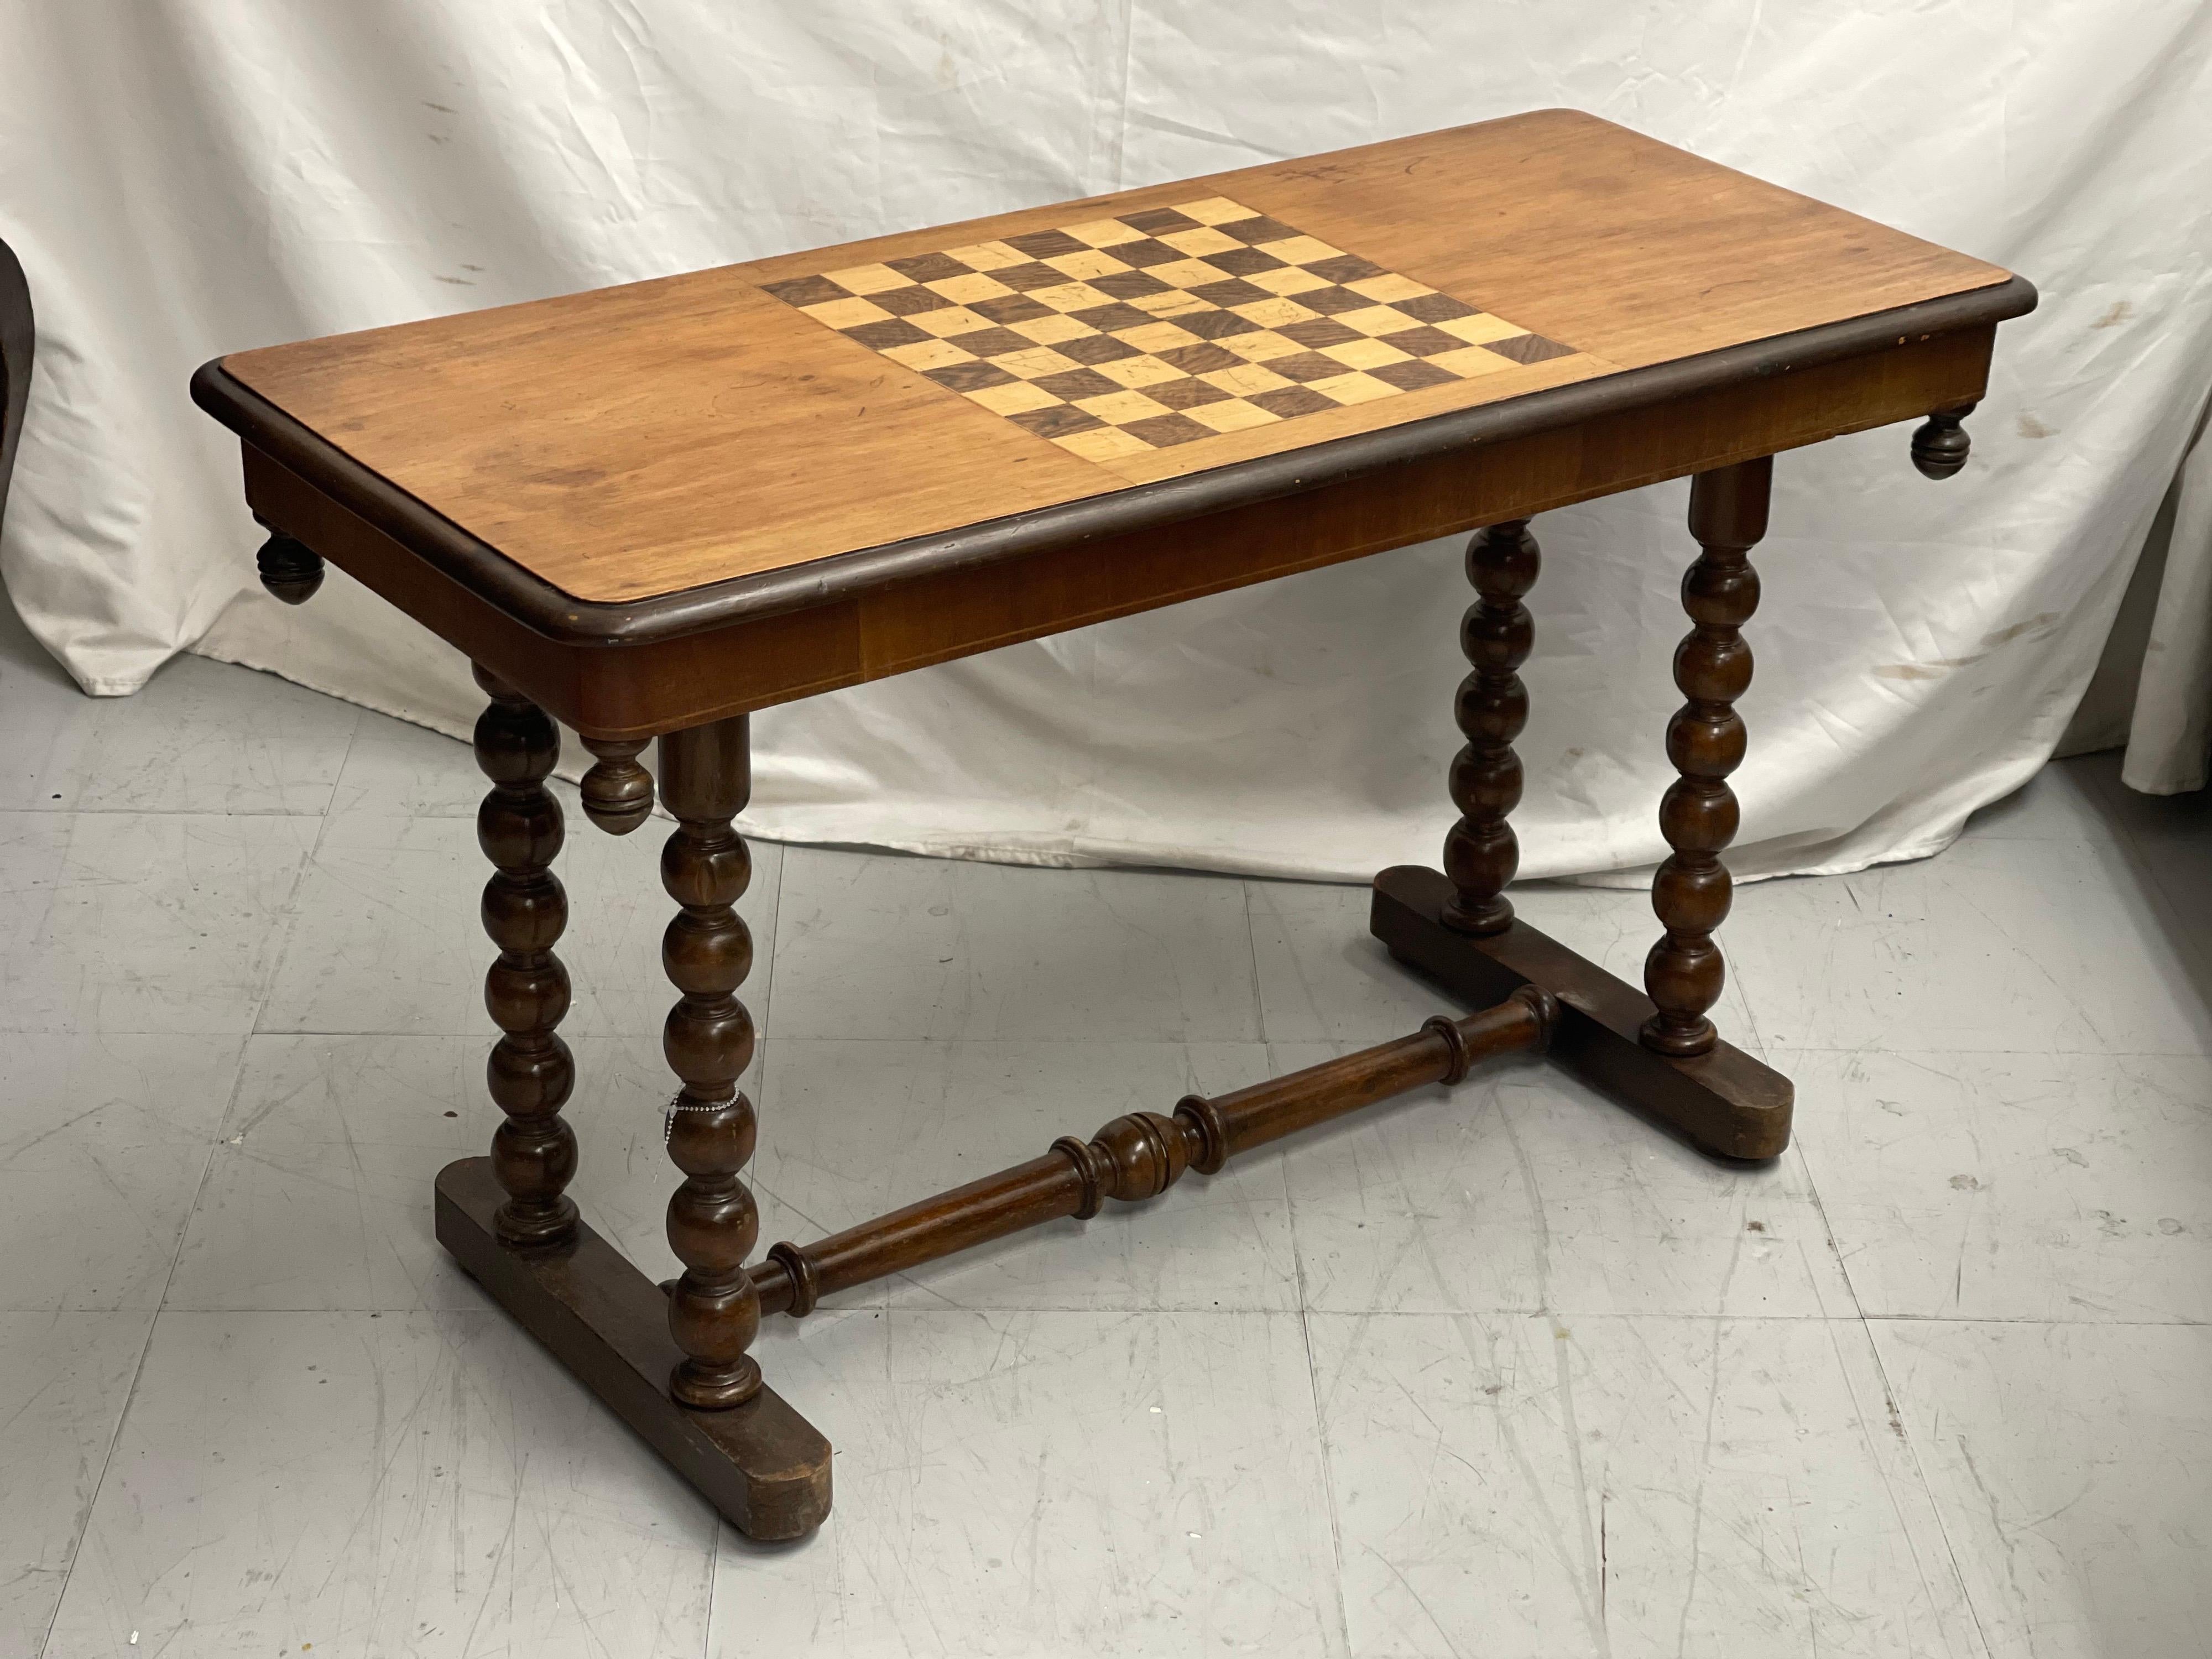 Original Victorian circa 1860-1880 burr walnut chess games table with Bobbin turned base A well made table, it can be used as an occasional table or for chess as intended, the materials used are very decorative and it could be considered art